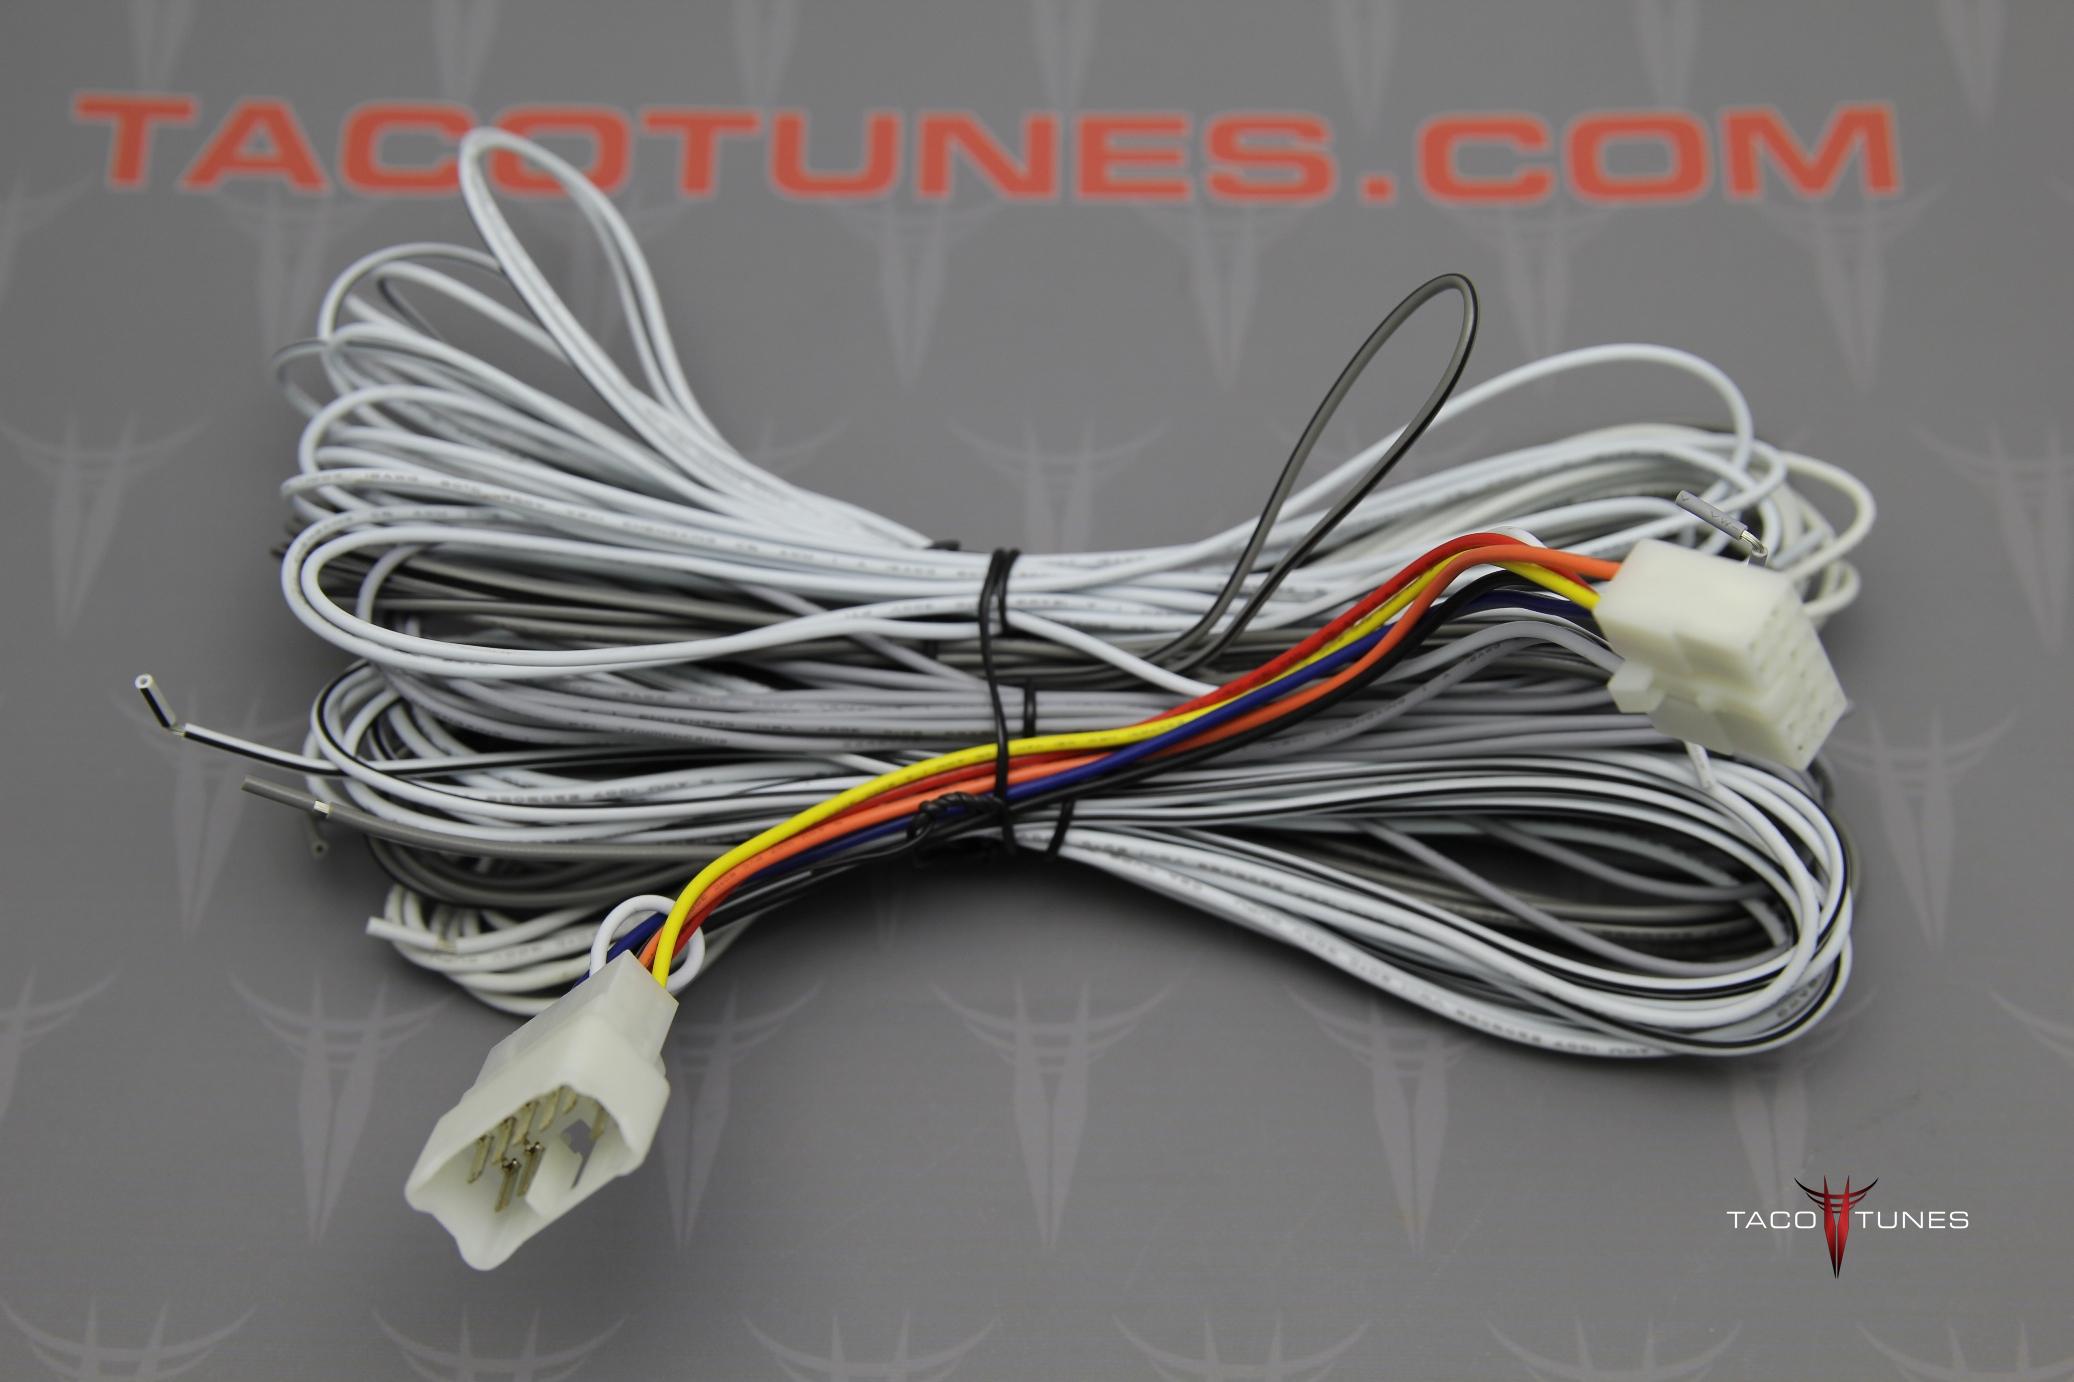 2016 Toyota Tundra Amp Wiring from tacotunes.com